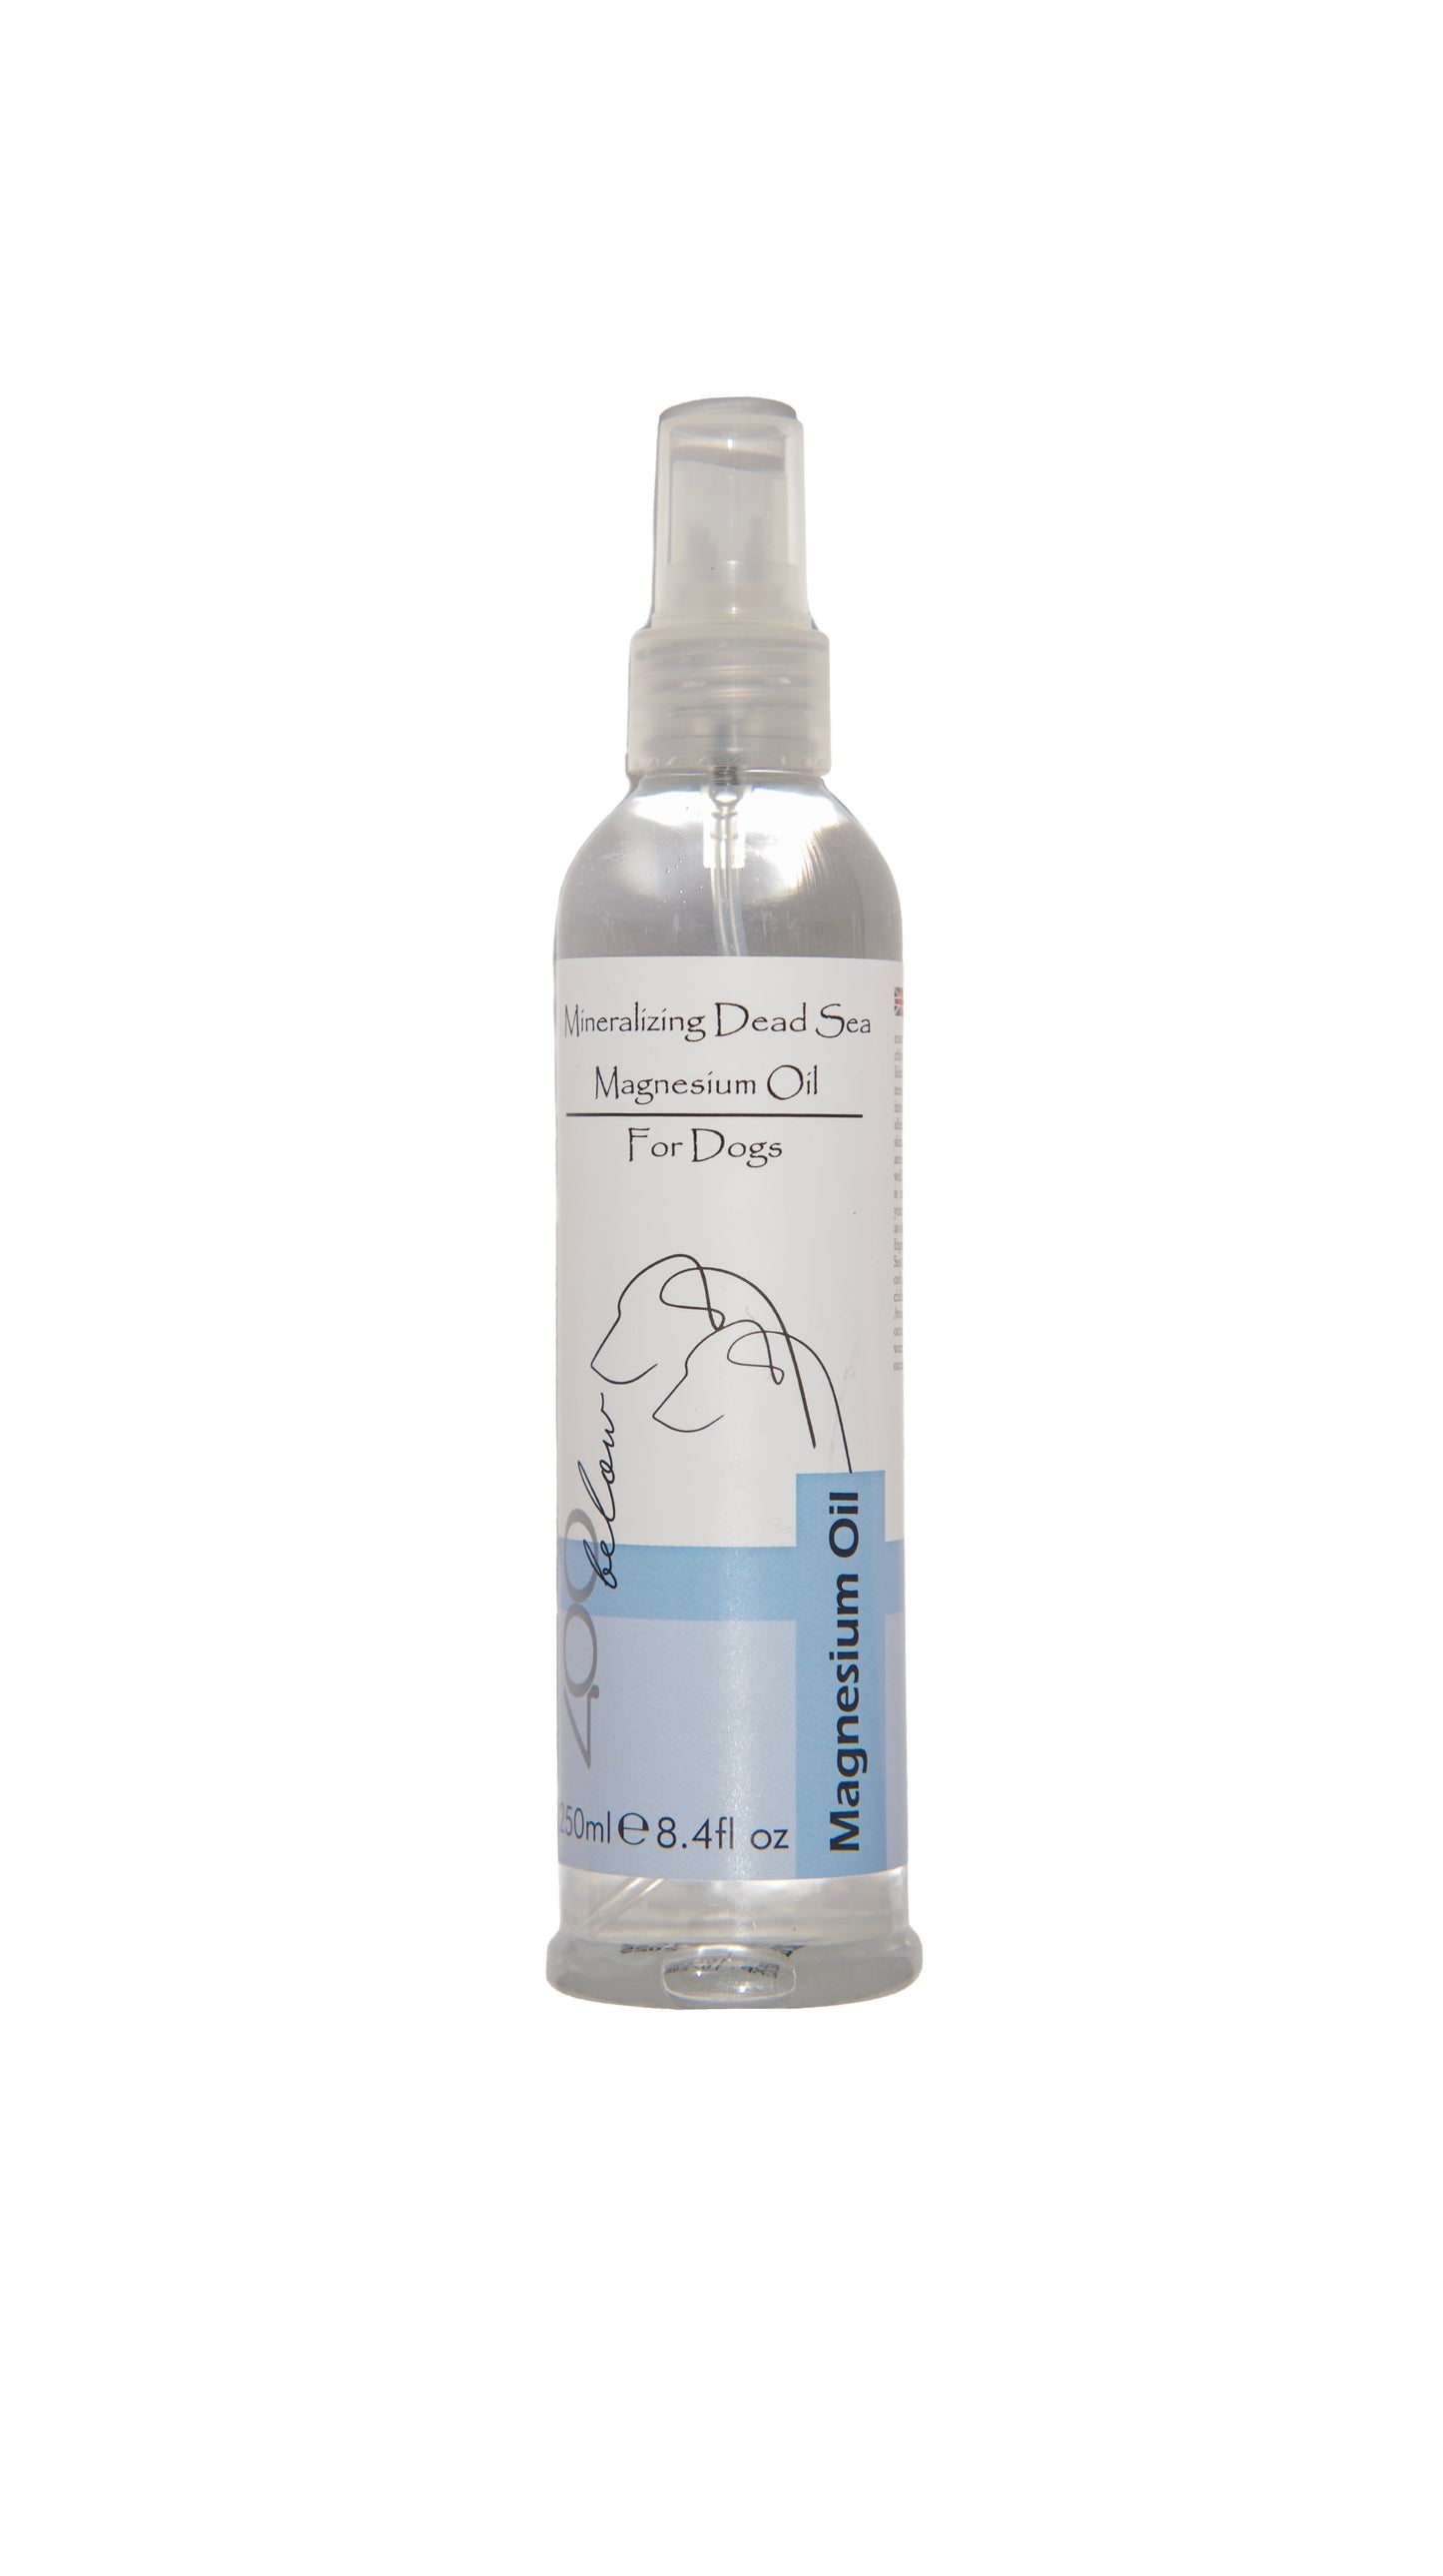 Mineralizing Dead Sea Magnesium Oil for Dogs